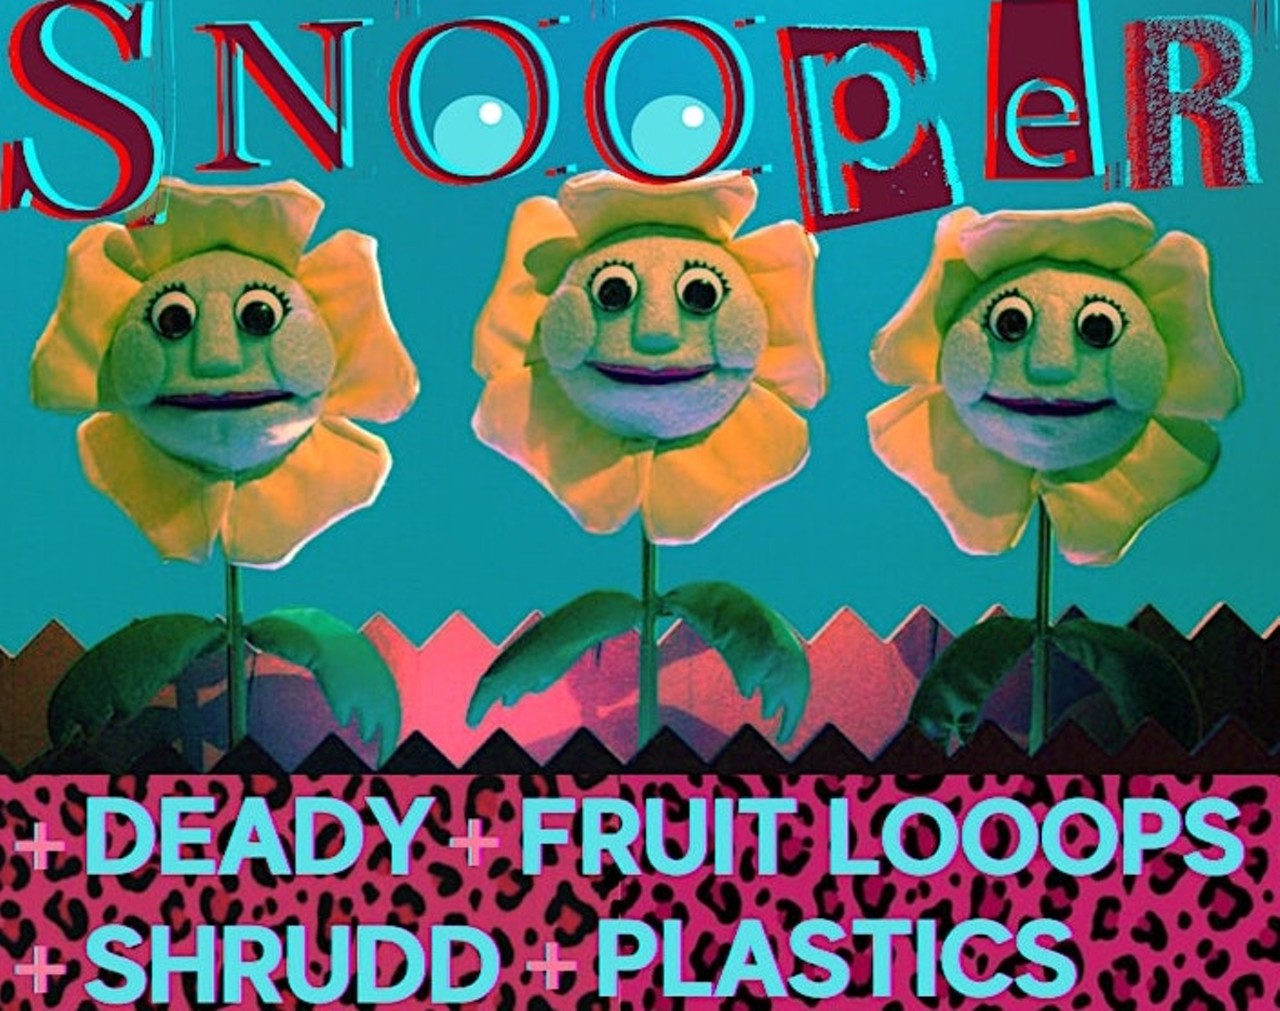 FRIDAY, MAY 10
Snõõper, Deady, Fruit Loops, Plastics 
Portal | 1535 Lytle St. | portal-louisville.com | $10 adv/$15 door | 8 p.m. | All ages
With their exceedingly high-energy, 80’s neon tracksuits, synchronized choreography, and assortment of papier-mâché props, Nashville’s Snõõper is quite unlike anything you’ve ever experienced before. Described as “a band who, in a 33 1⁄3 RPM world, make 45 RPM music they play at 78 RPM,” their sound is somewhere along the lines of Devo covering Black Flag covering The Ramones, and their songs are as catchy as their live show is fun. With a bill that also features the equally as energetic Deady, Fruit Loops (from Cincinnati), and Plastics, this is a show you’re just gonna need to catch!